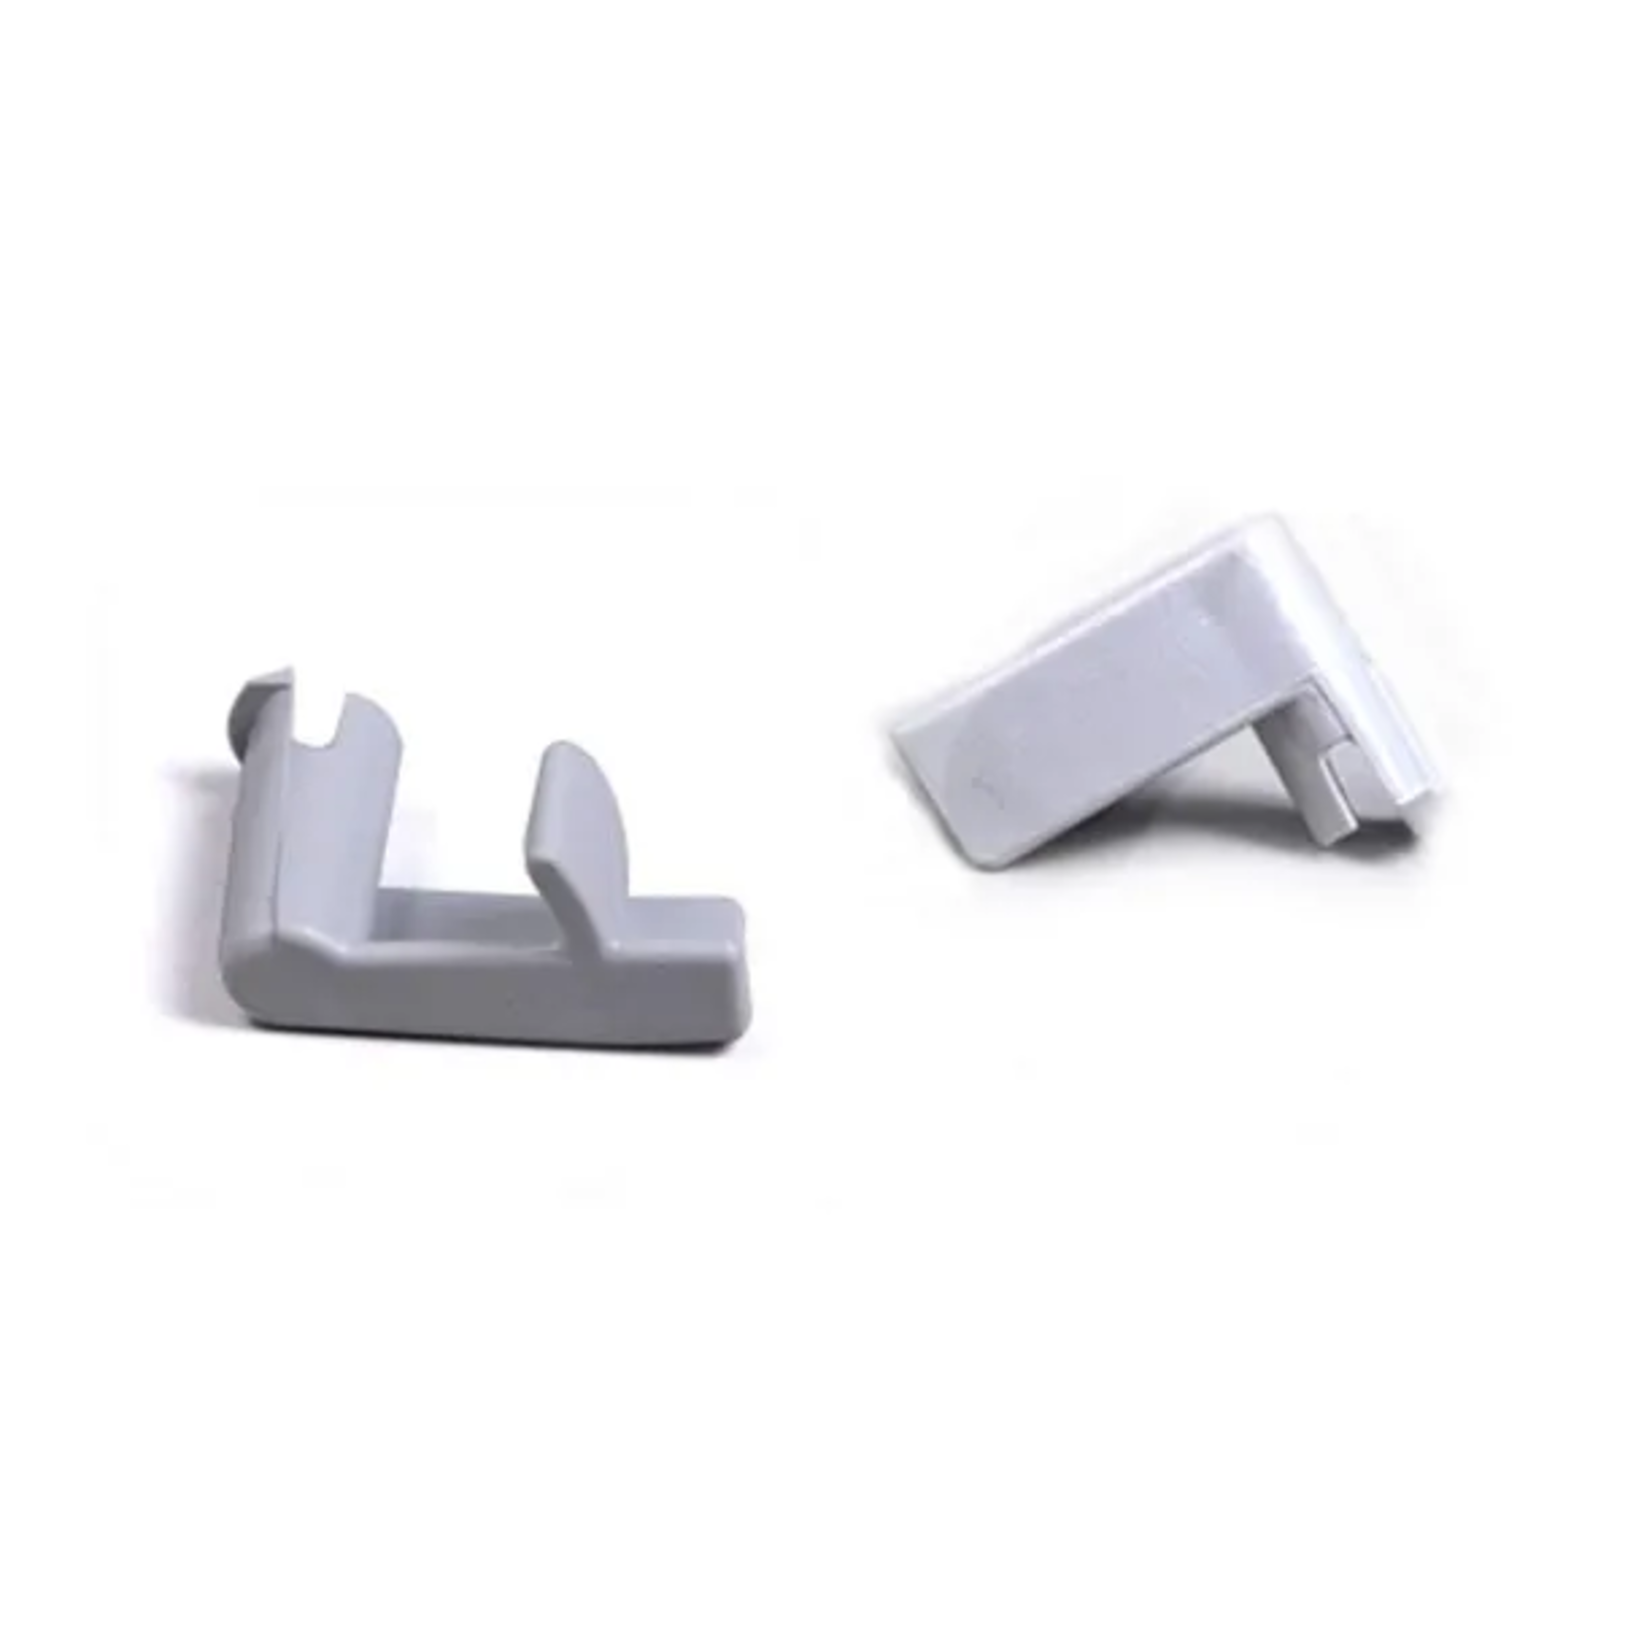 Hoover Hoover Recovery Tank Latch Left Hand - Grey